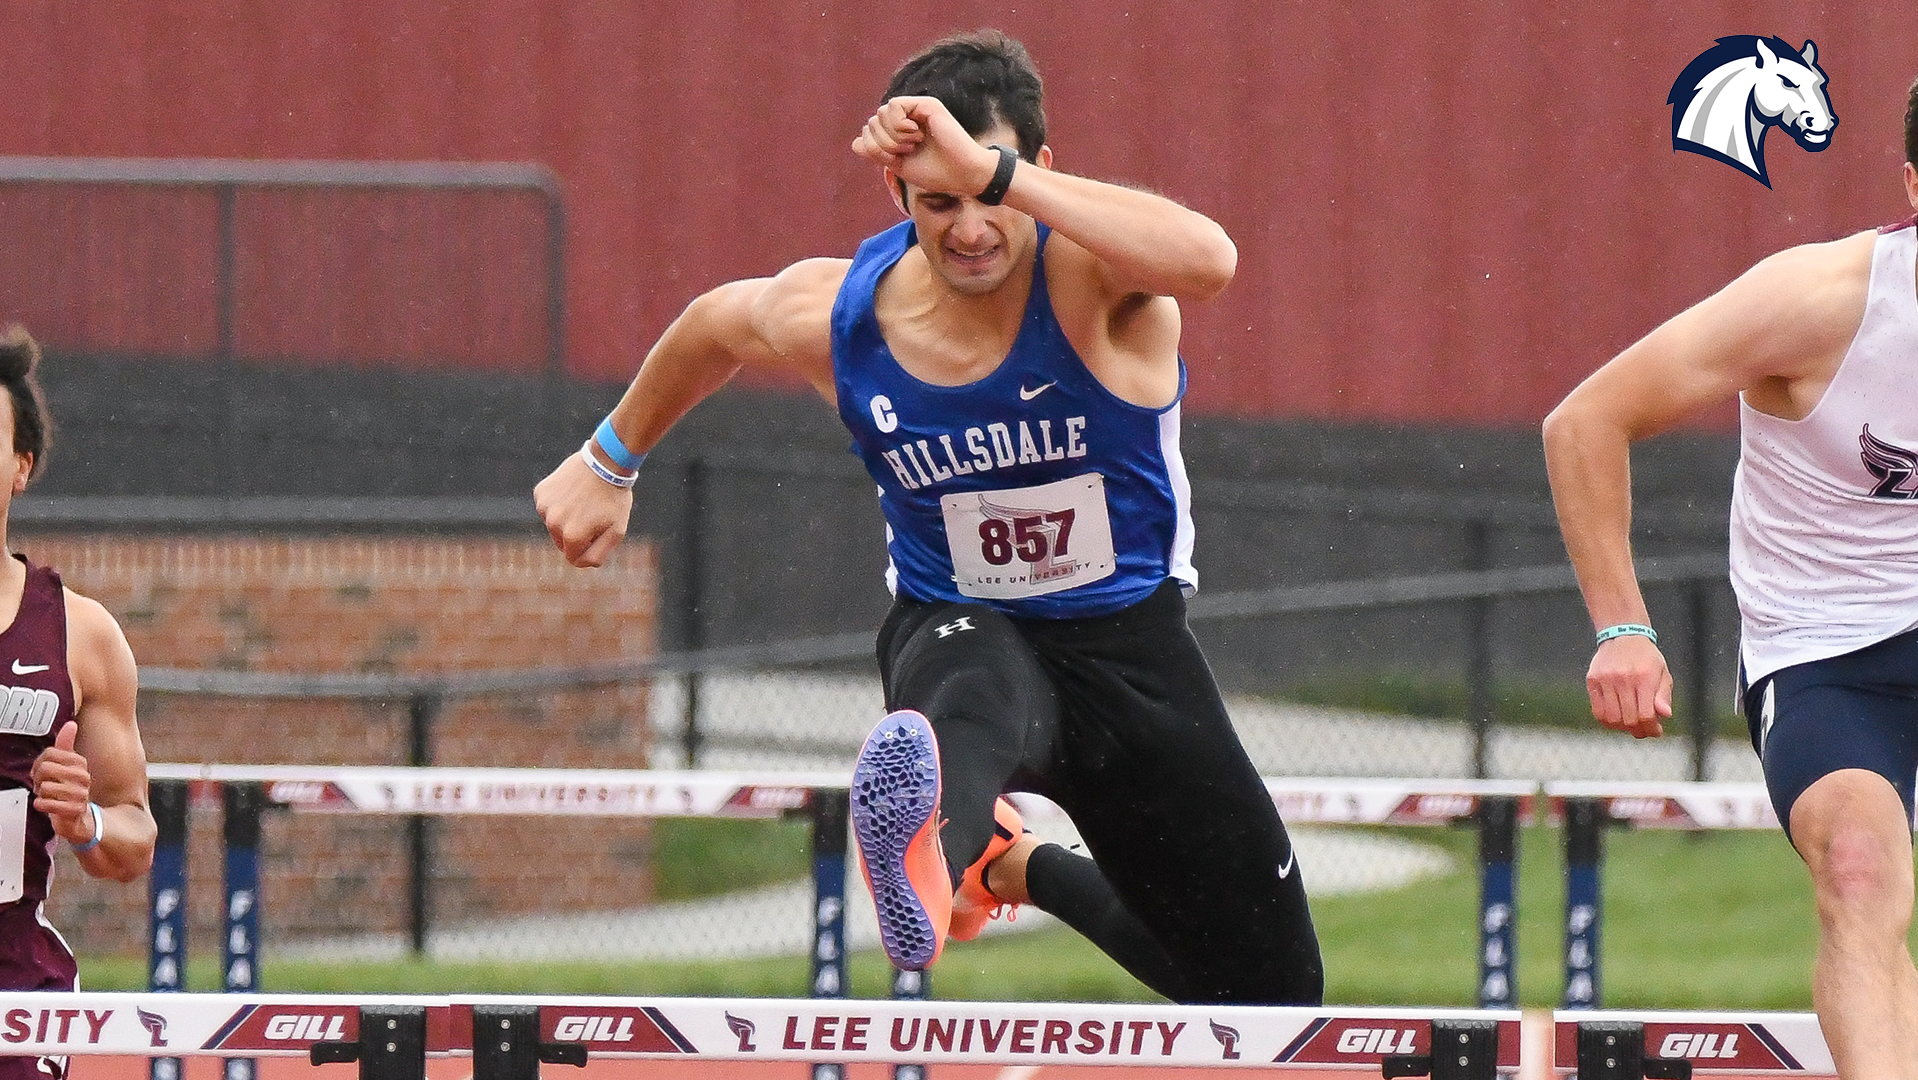 Strong returns for Charger men's athletes highlight performances at GVSU Al Owens Classic